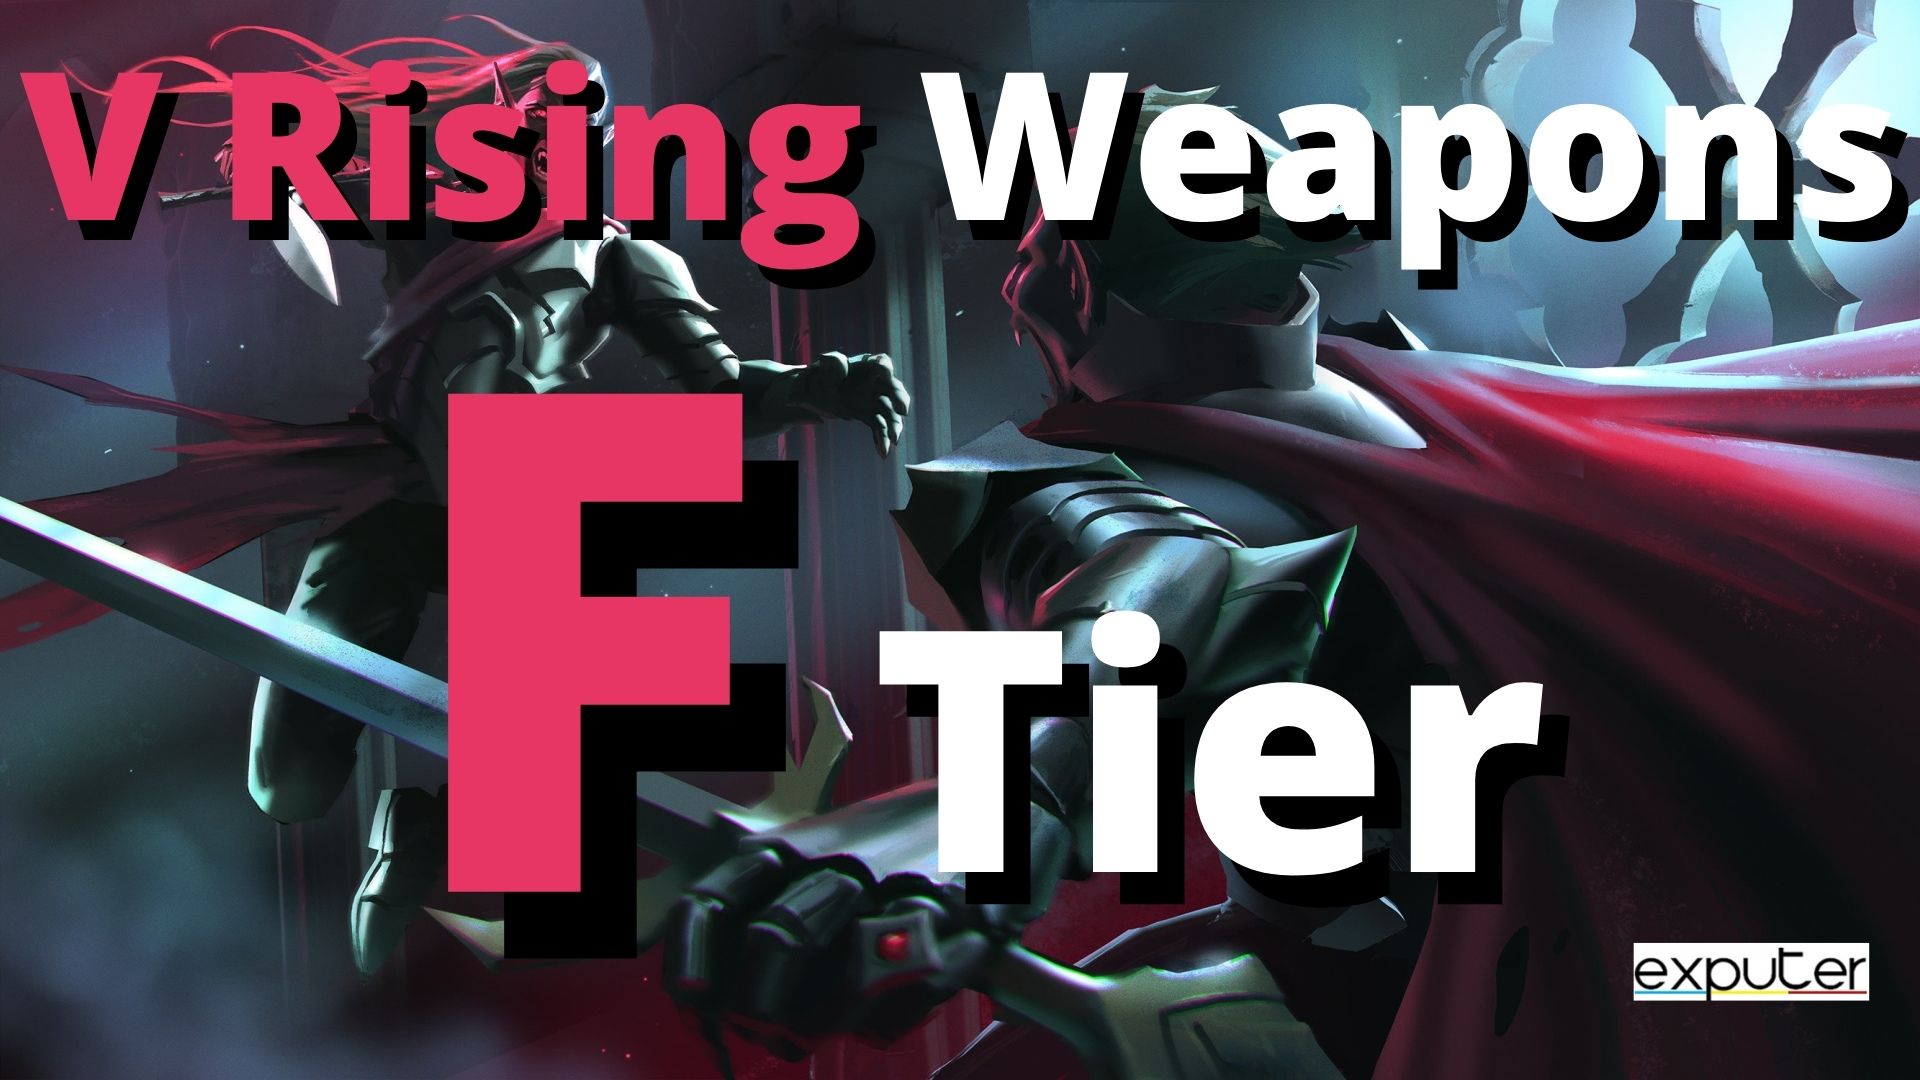 F tier of V Rising Weapons